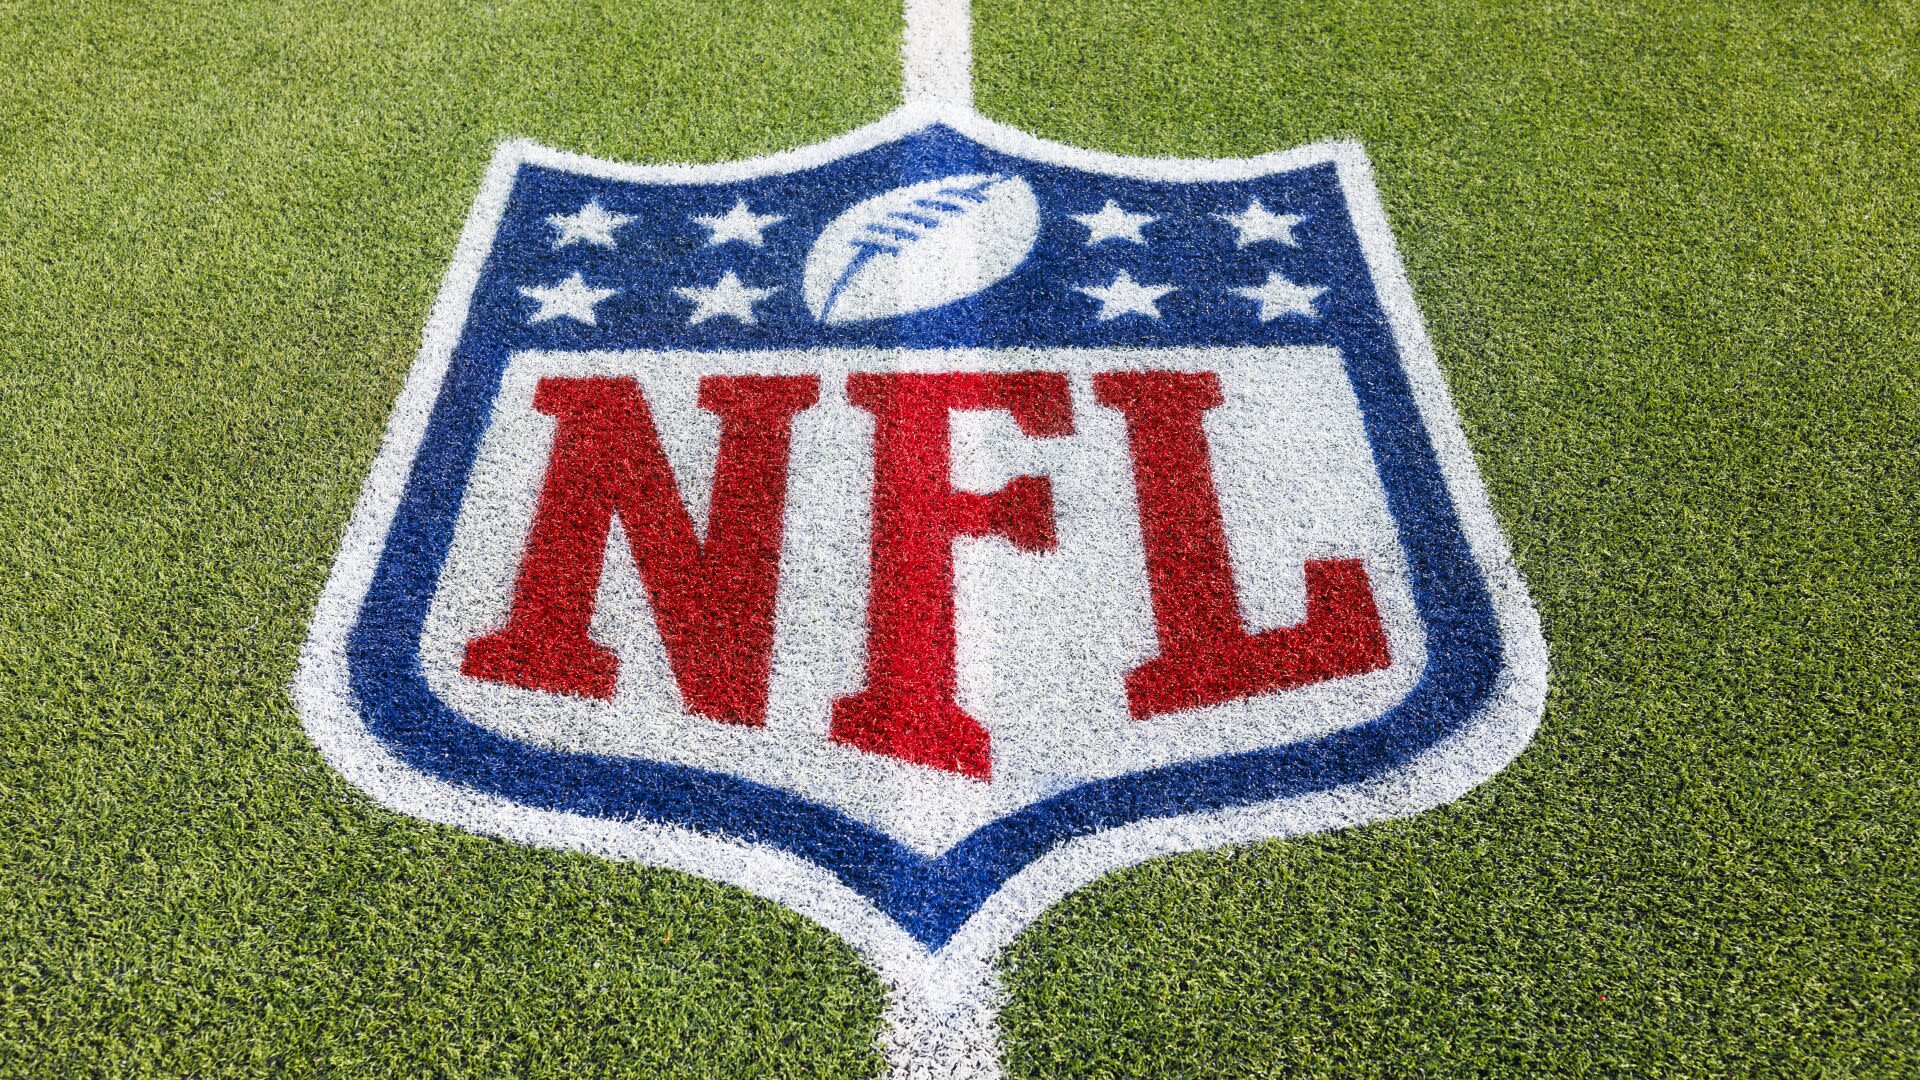 NFL attacks jury's basis for coming up with $4.7 billion verdict